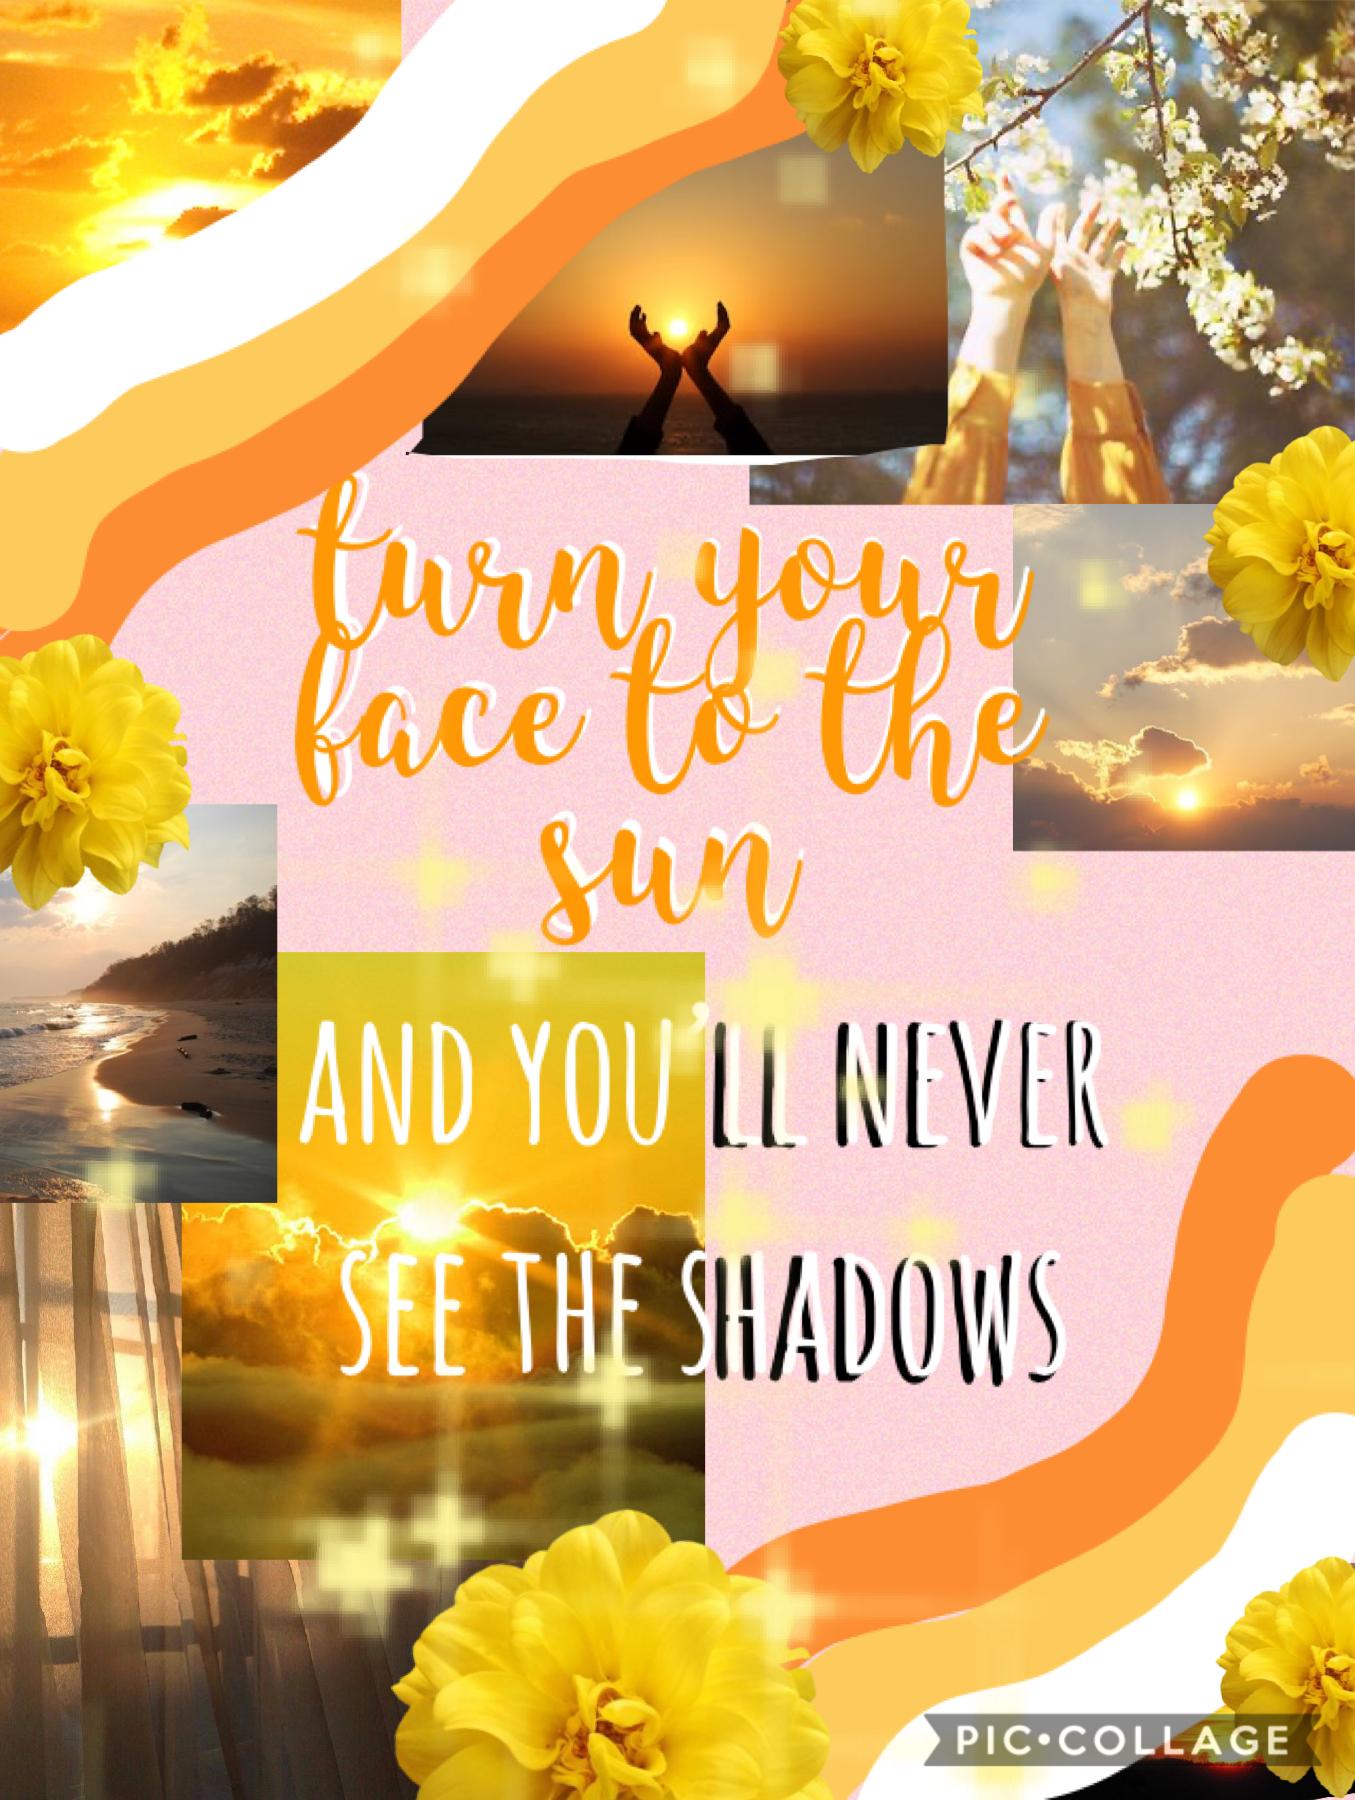 ☀️never see the shadows☀️stay in the sun☀️

#sun #yellow #bright #smile #light #goodness #beautiful #sunshine #shadows #collage #piccollage